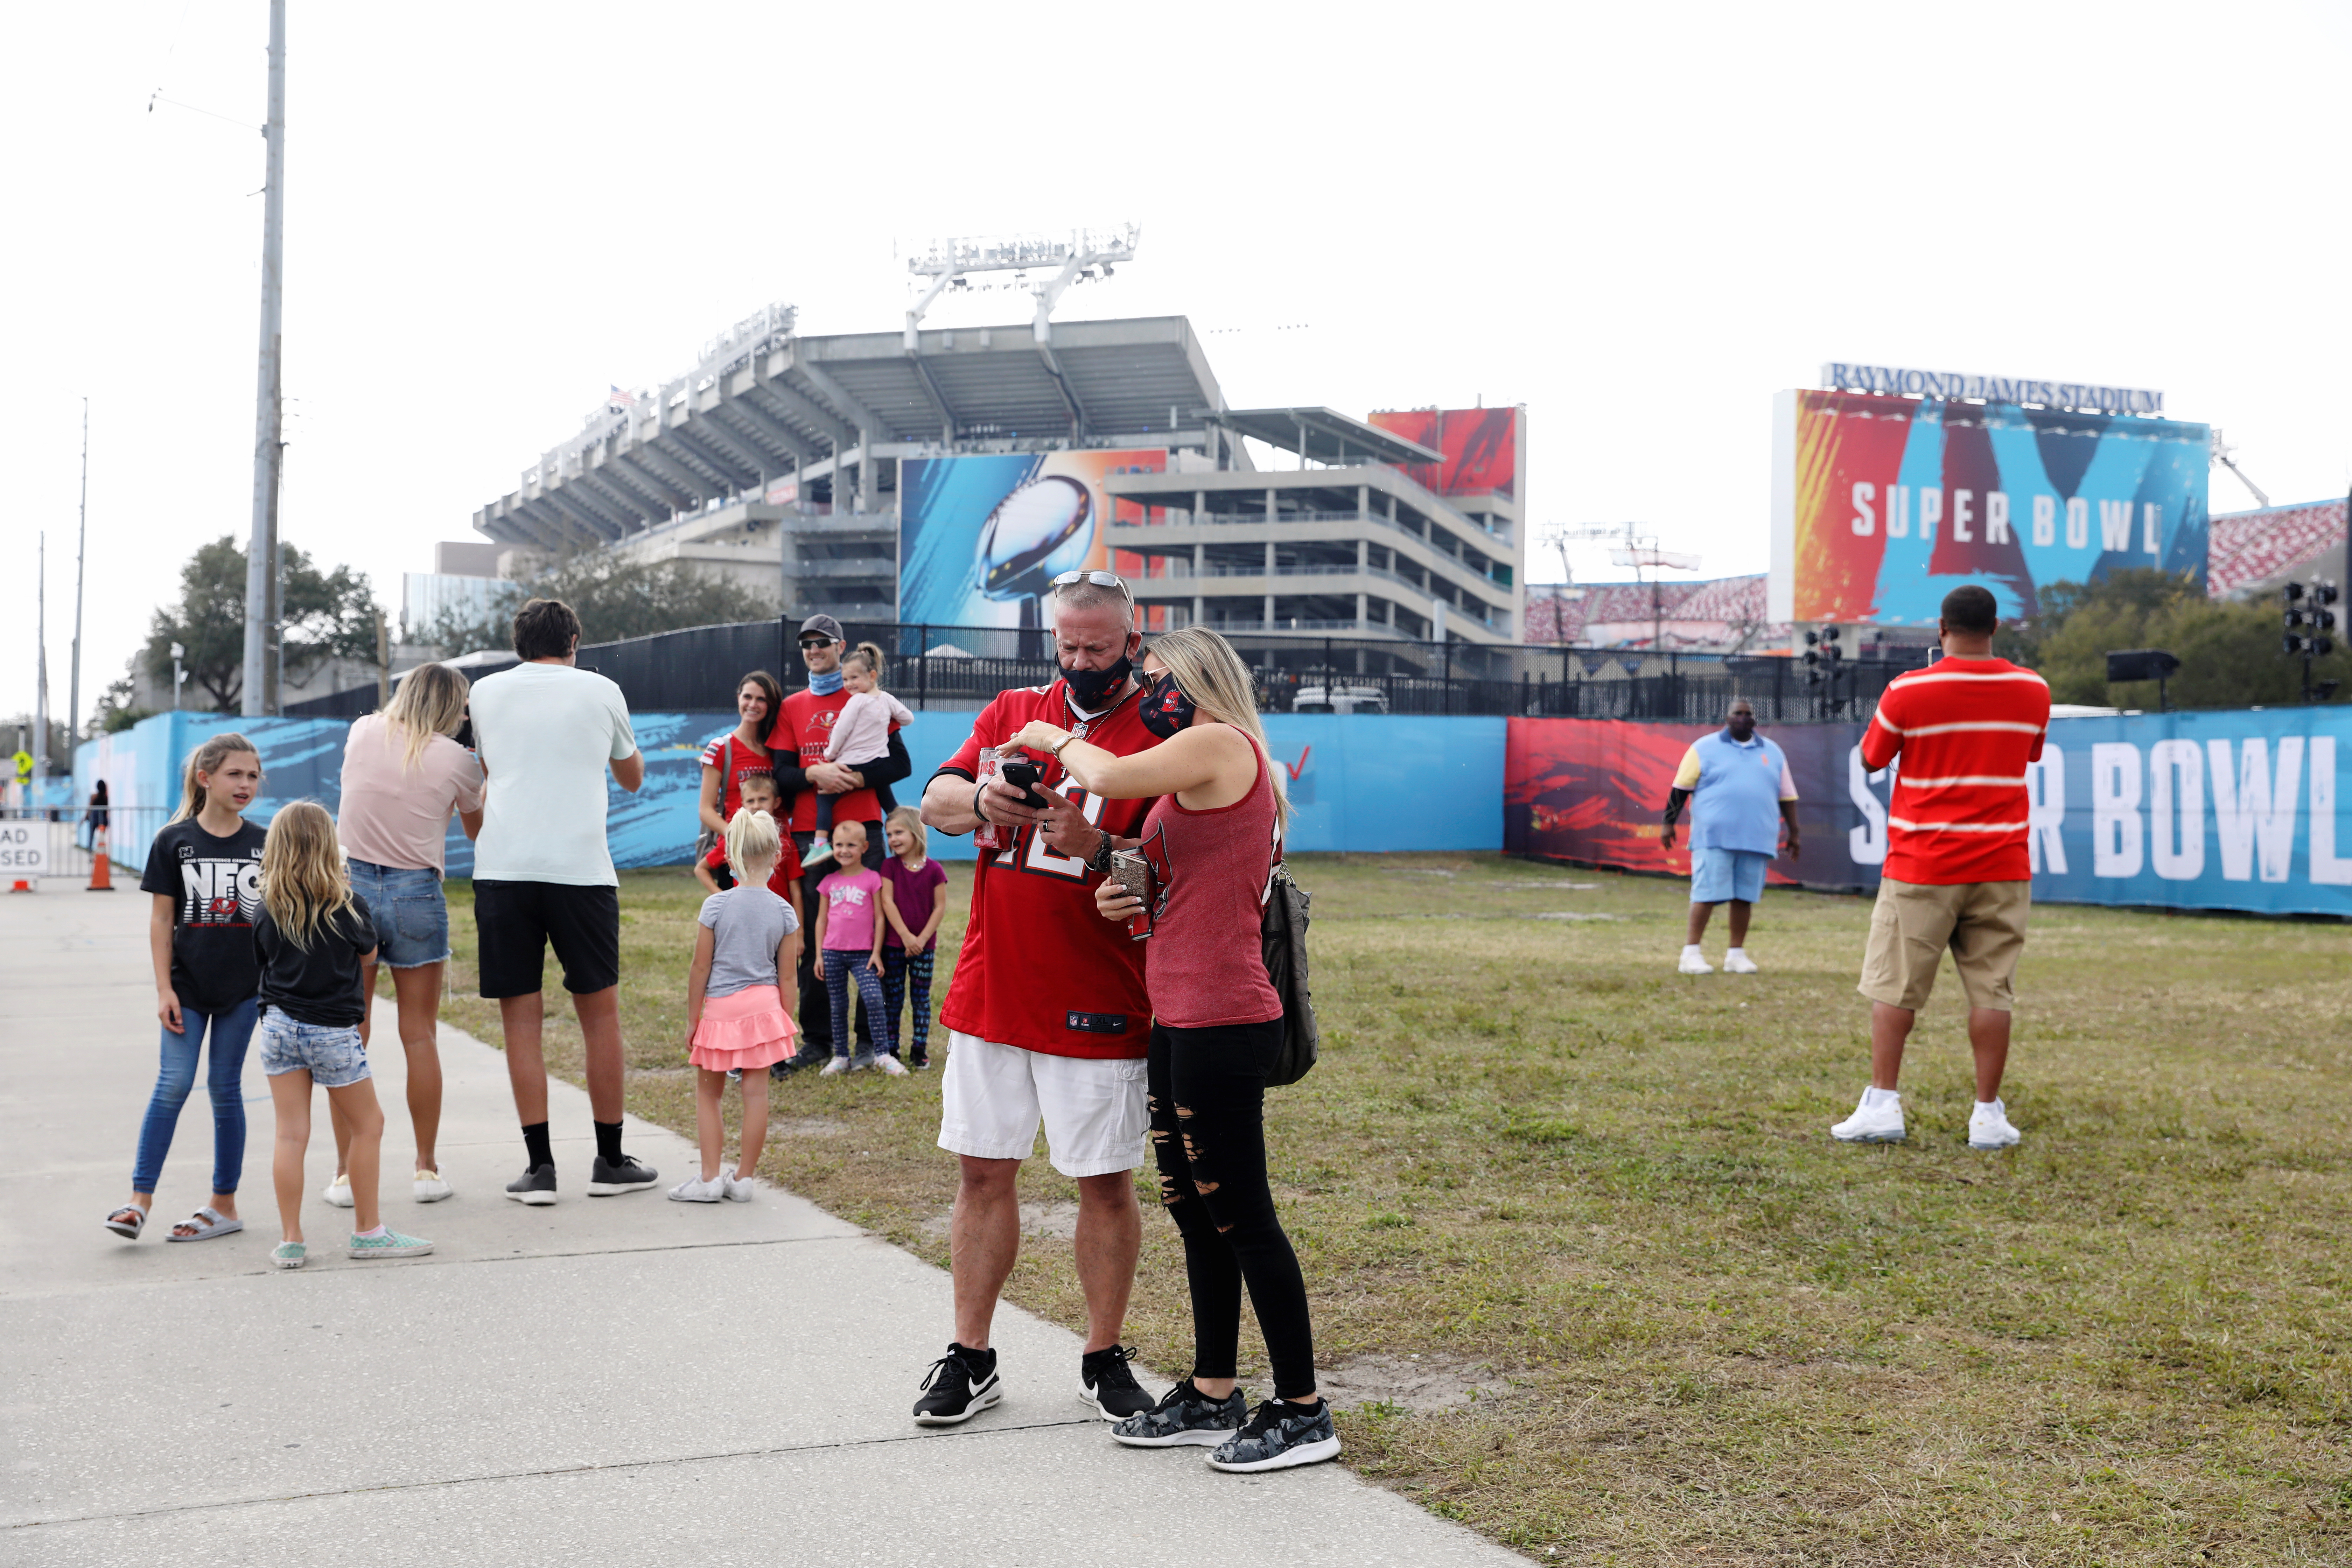 NFL fans spend time around the exterior of Raymond James Stadium ahead of the weekend's Super Bowl LV between the Kansas City Chiefs and Tampa Bay Buccaneers in Tampa, Florida, U.S., February 6, 2021.  REUTERS/Eve Edelheit